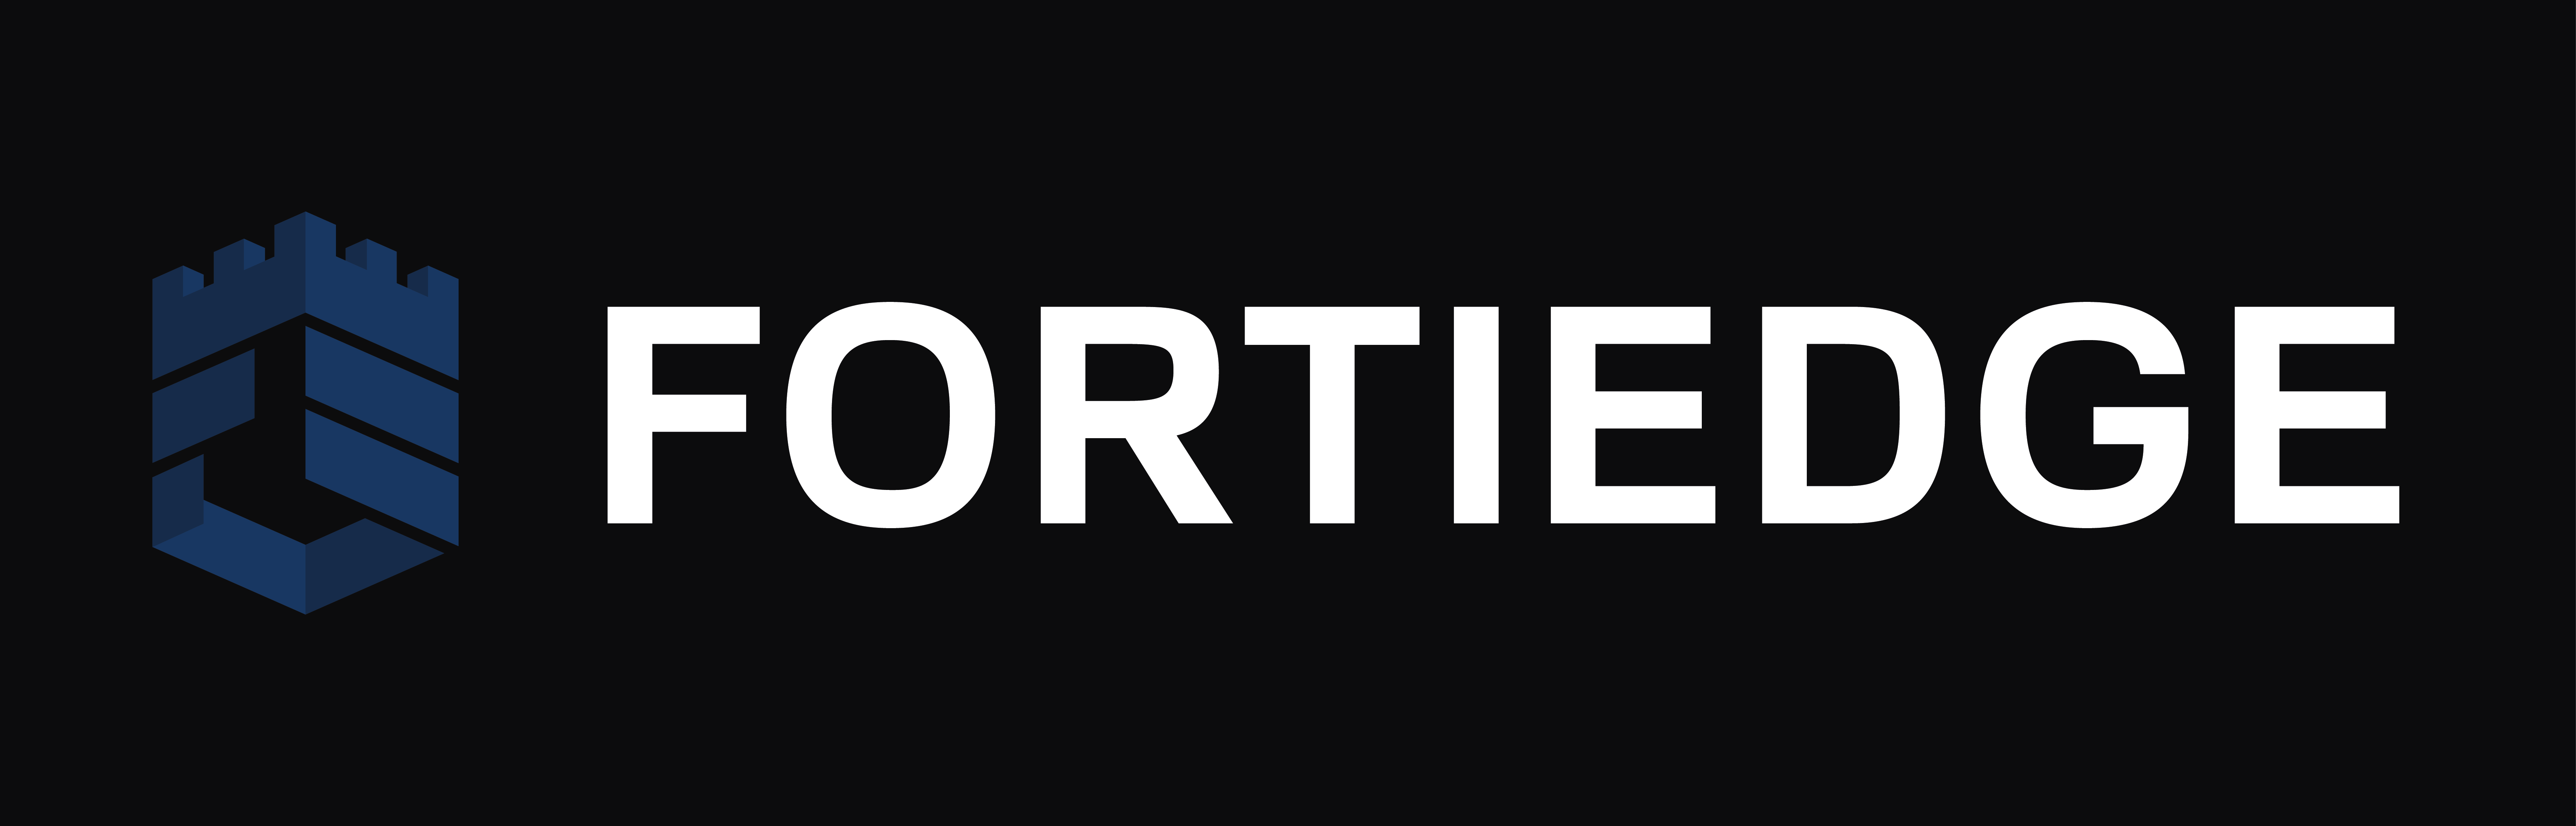 Fortiedge